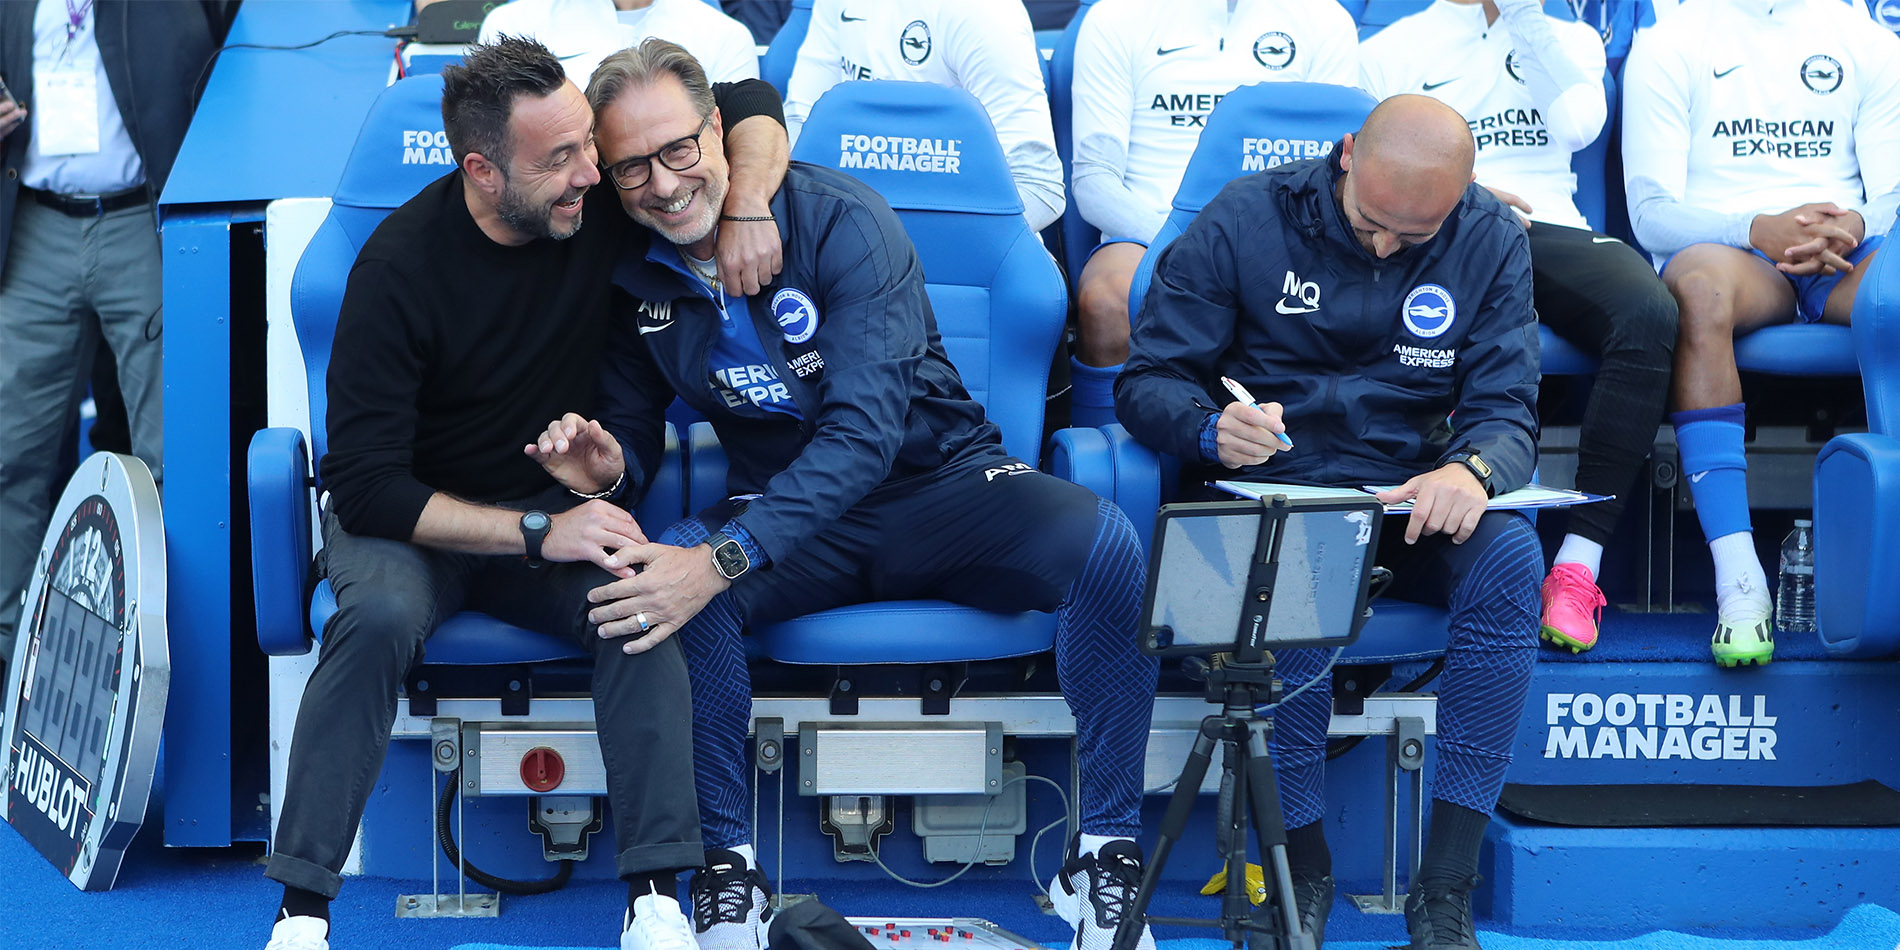 Football Manager continue as Brighton & Hove Albion Football Club Partner